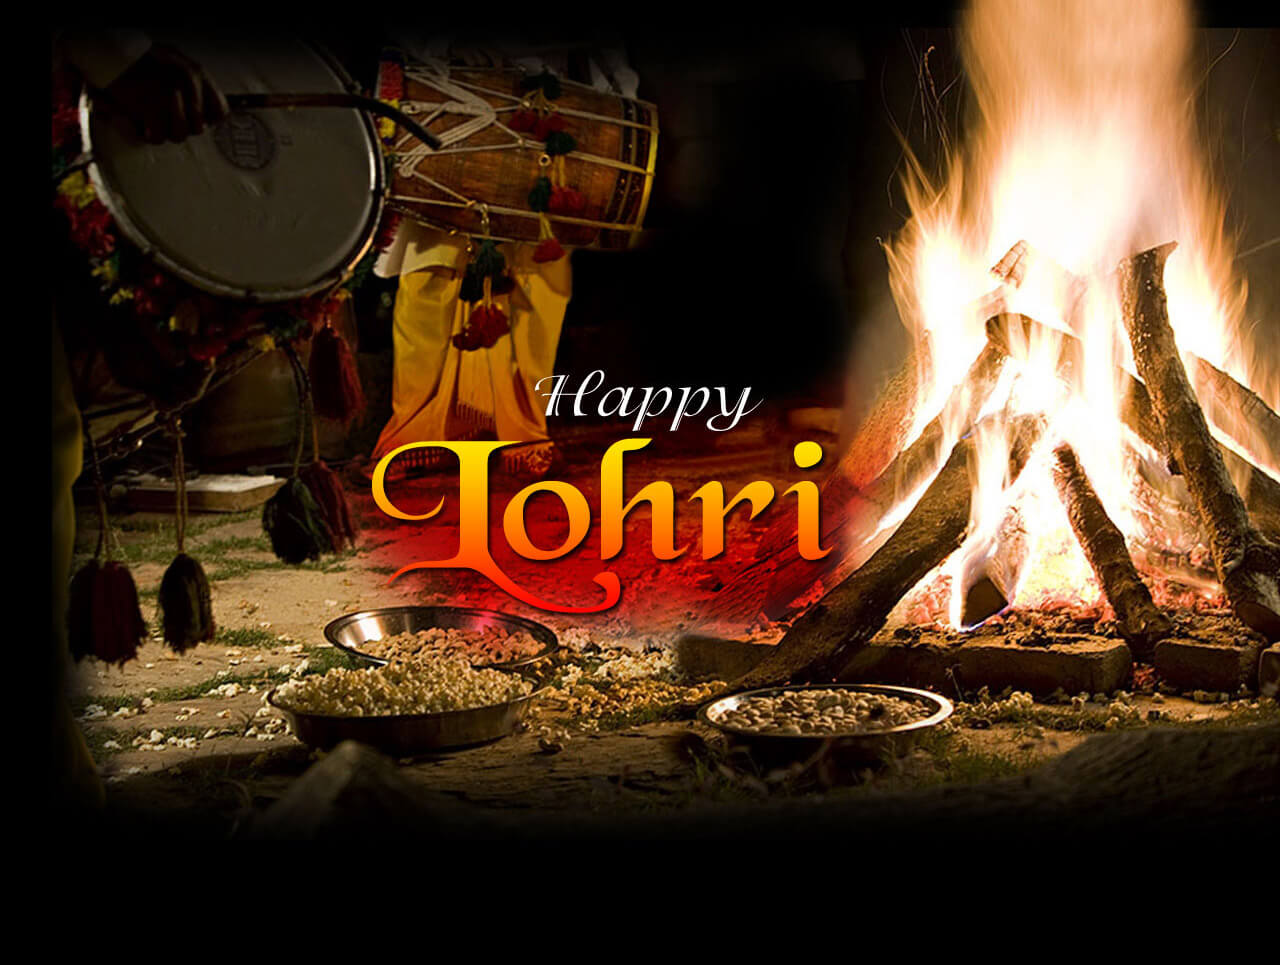 (100+) Happy Lohri 2020 – Wishes, Wallpapers, Images, Boliyan, SMS & Status